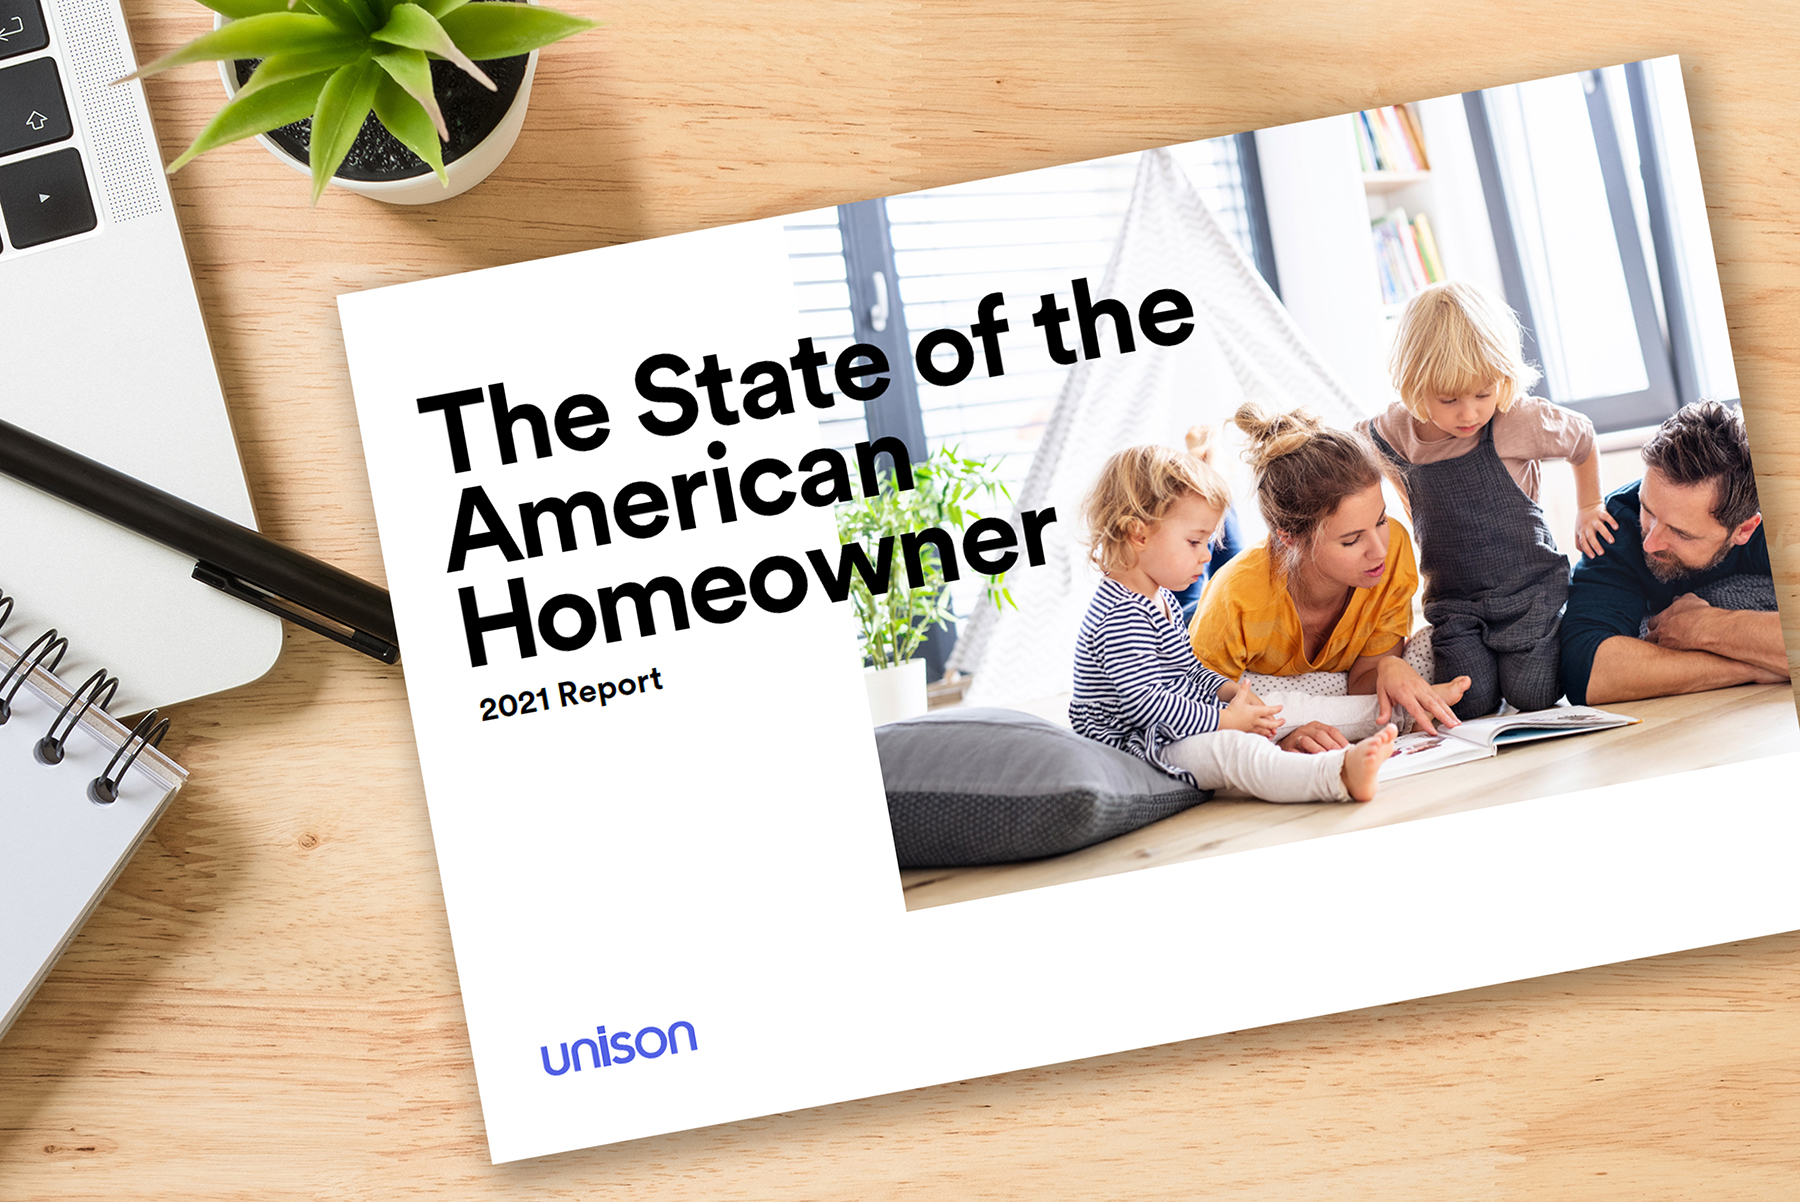 Unison's booklet containing "The State of the American Homeowner Report 2021"